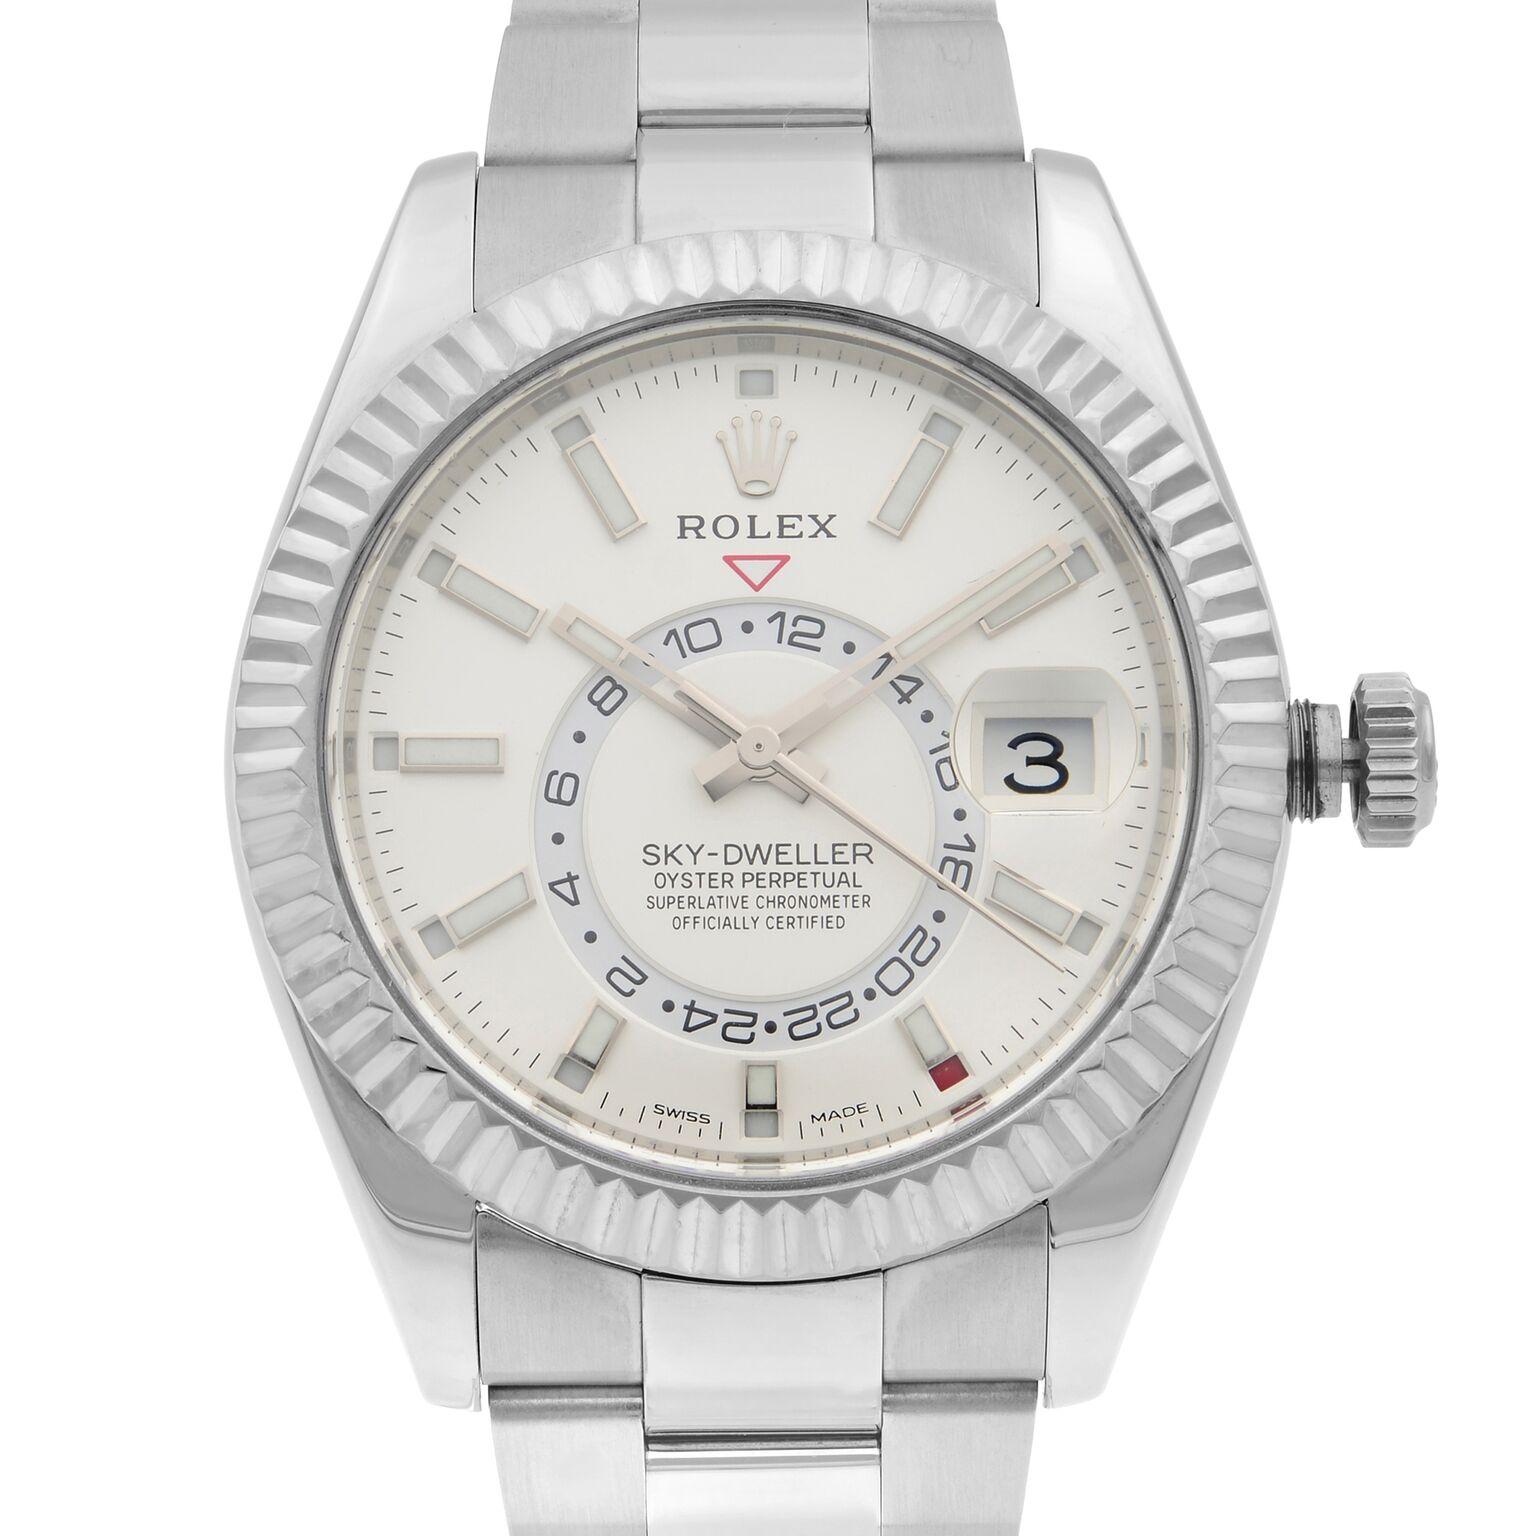 This pre-owned Rolex Sky-Dweller 326934WSO is a beautiful men's timepiece that is powered by a mechanical (automatic) movement which is cased in a stainless steel case. It has a round shape face, day indicator, GMT dial, and has hand sticks style